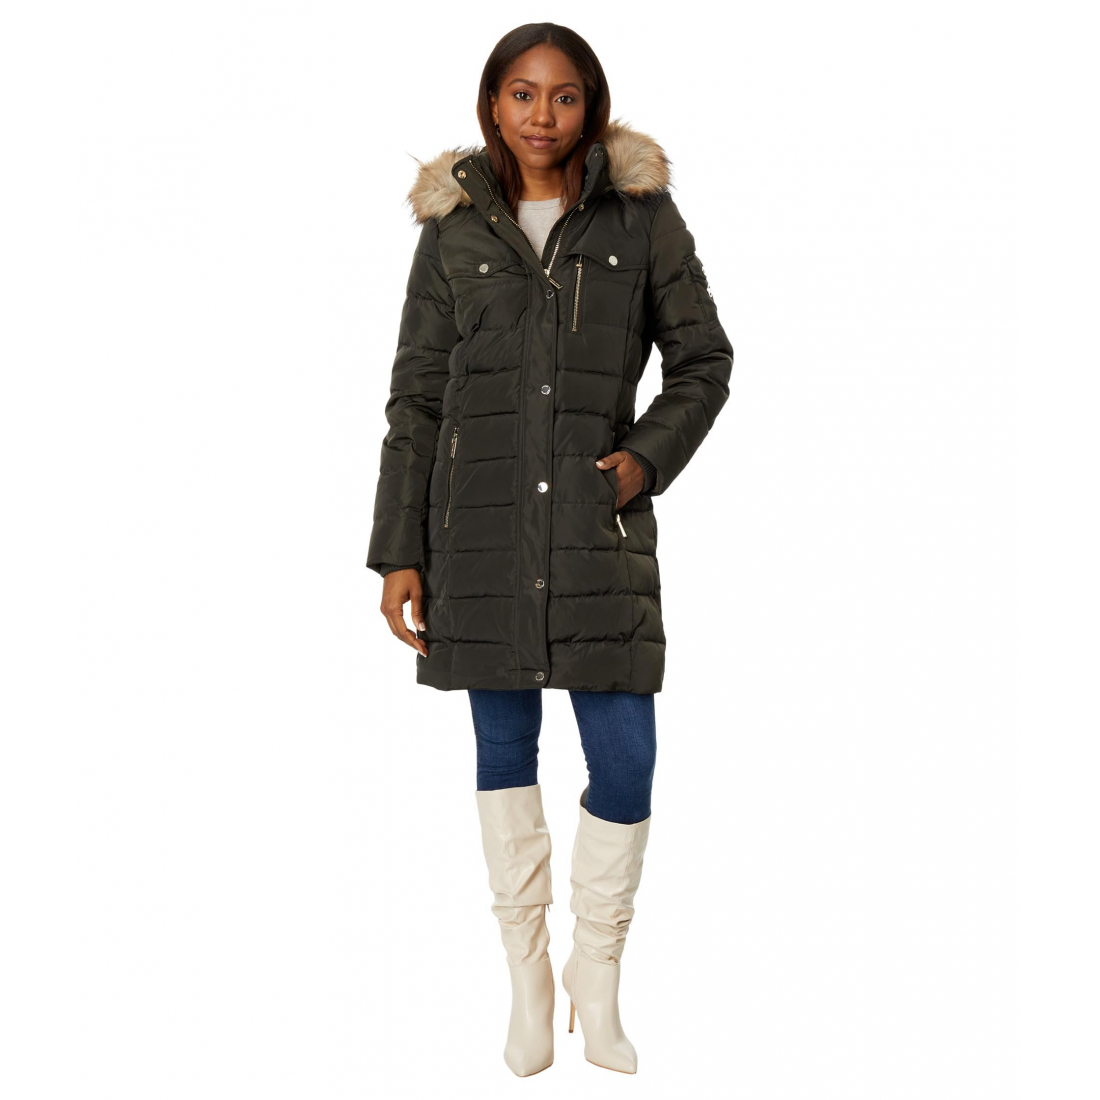 Women's 'Snap Front Down' Puffer Jacket